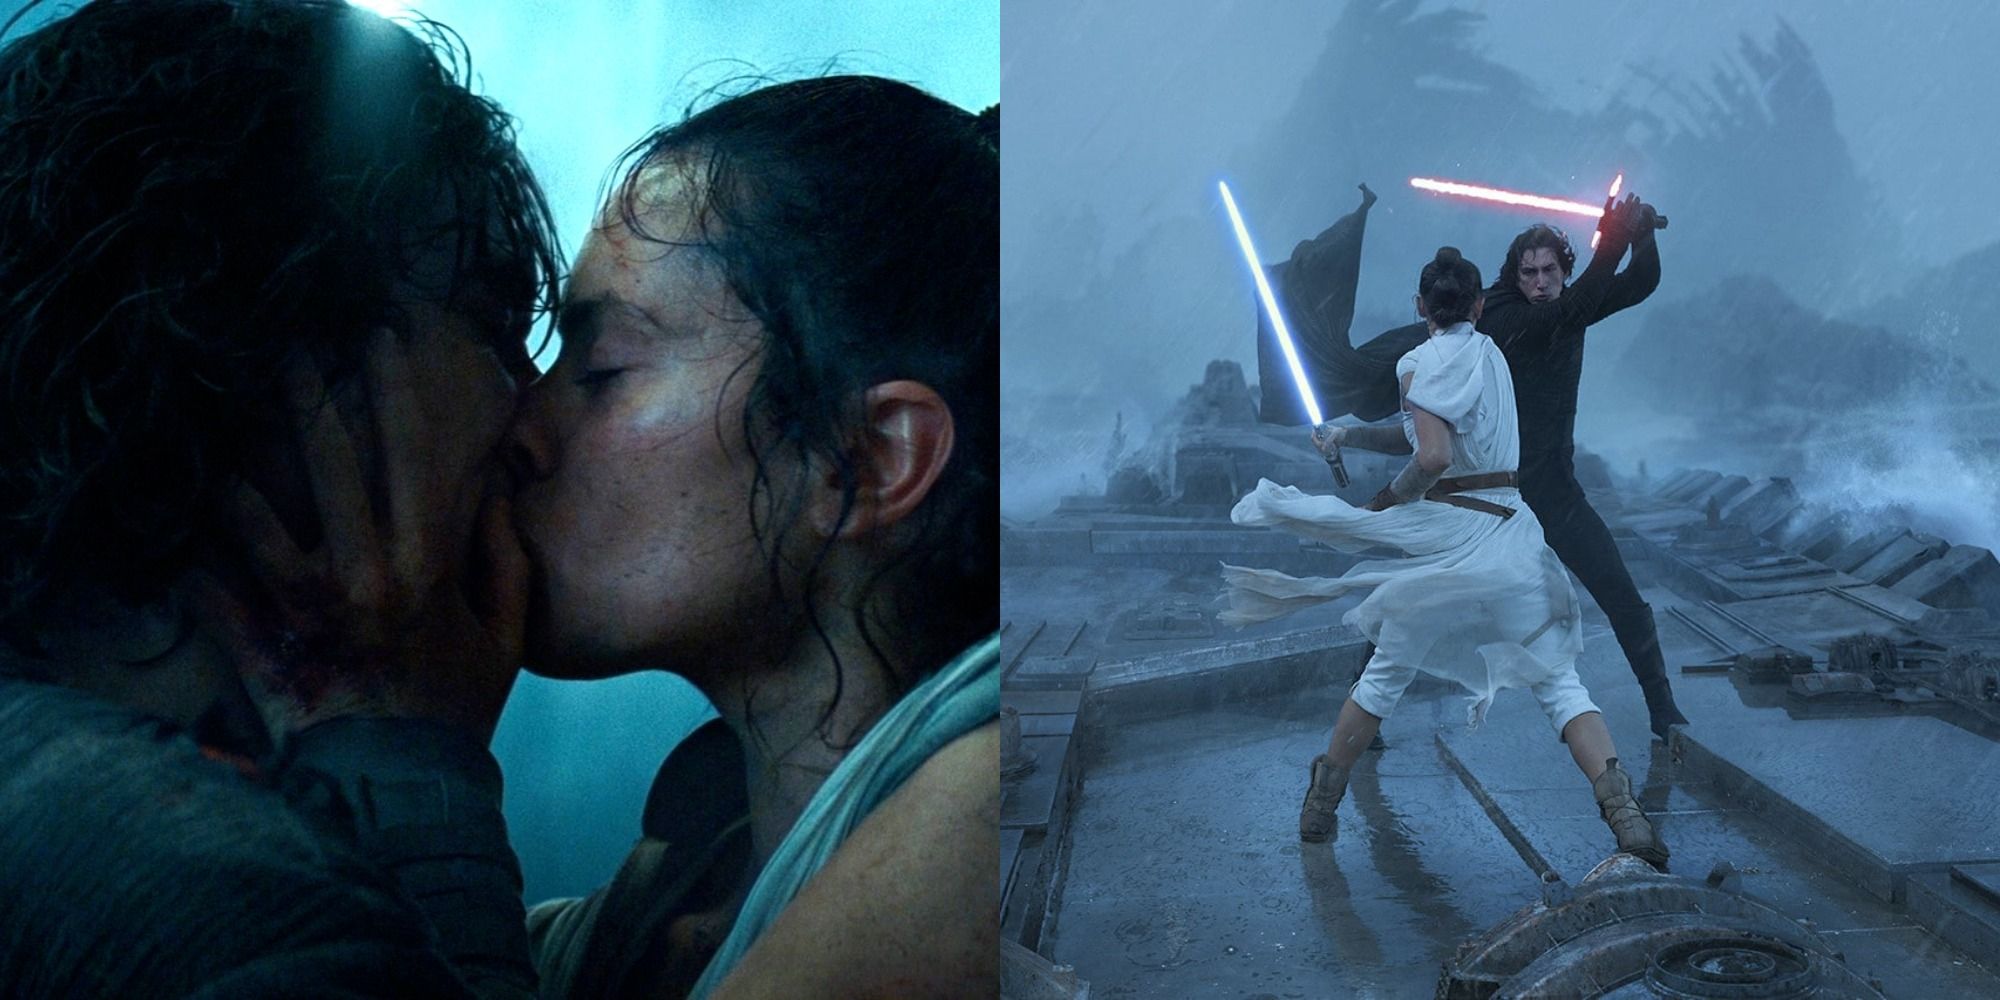 Star Wars 5 Scenes Where Rey And Kylo Ren S Rivalry Verged On Flirtation And 5 Where It Verged On